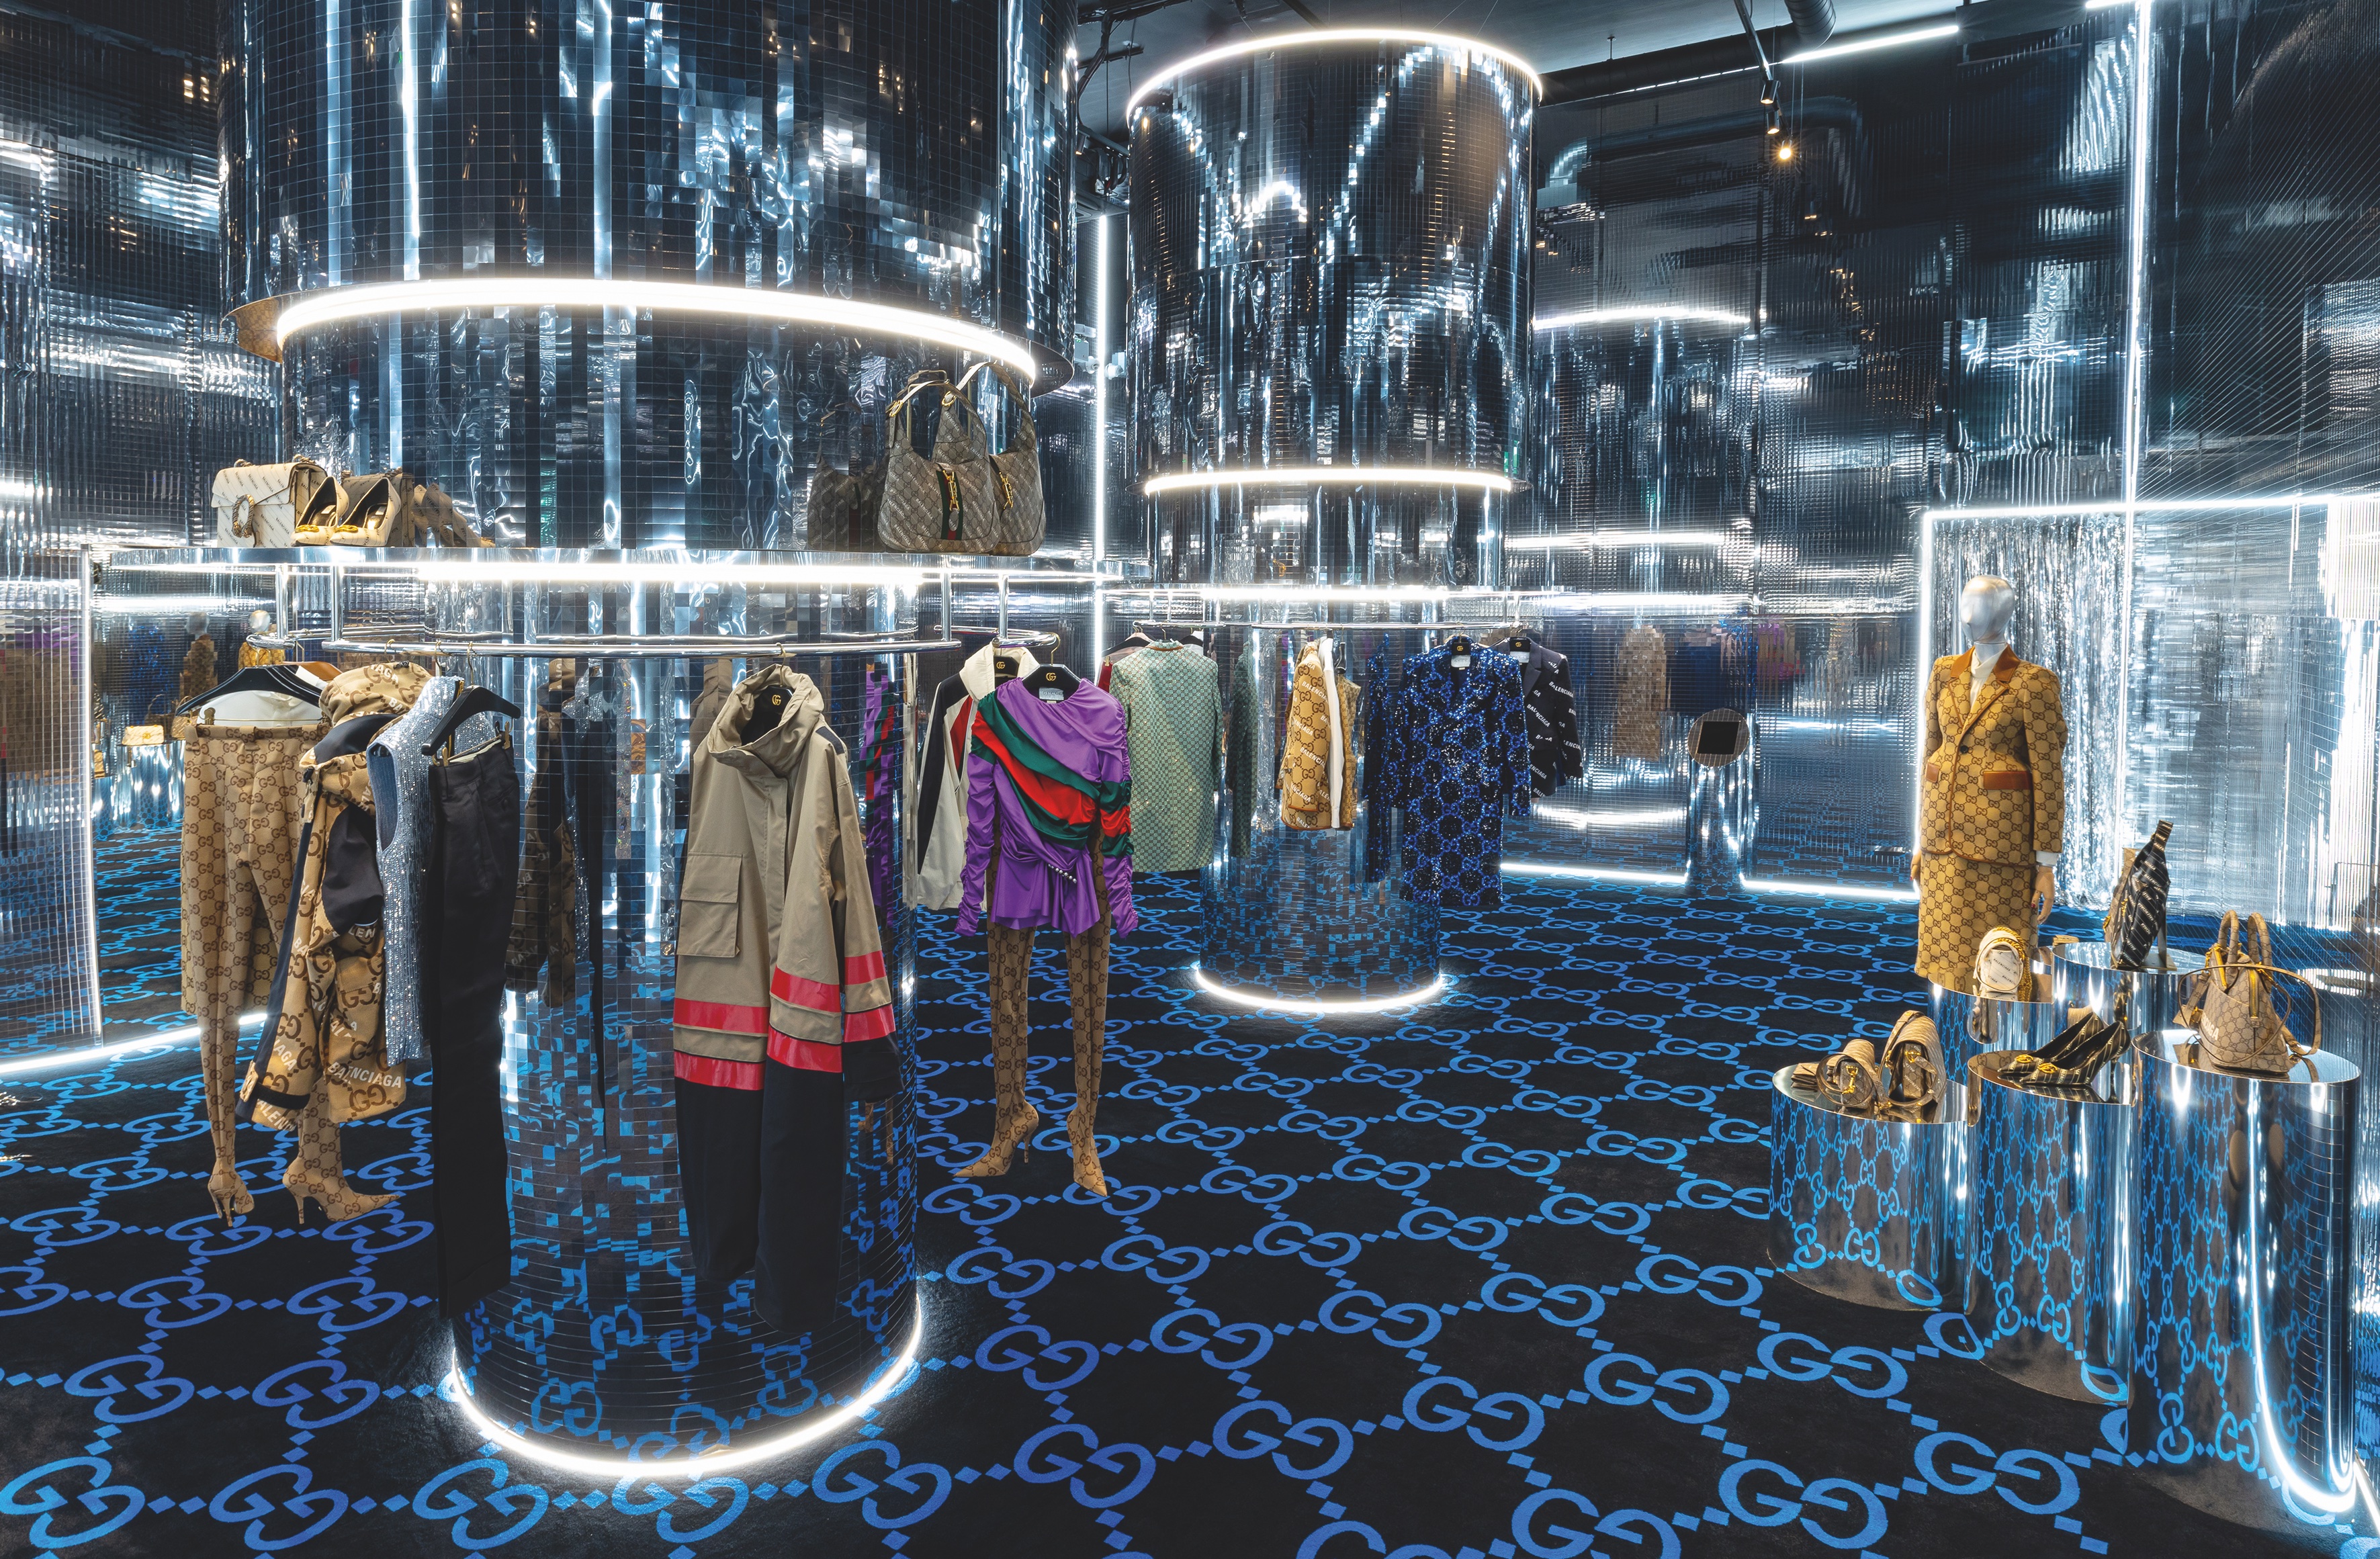 Inside the Gucci Circolo pop up shop with the GG monogram carpet and mirrored walls and clothes rails. with neon lights.